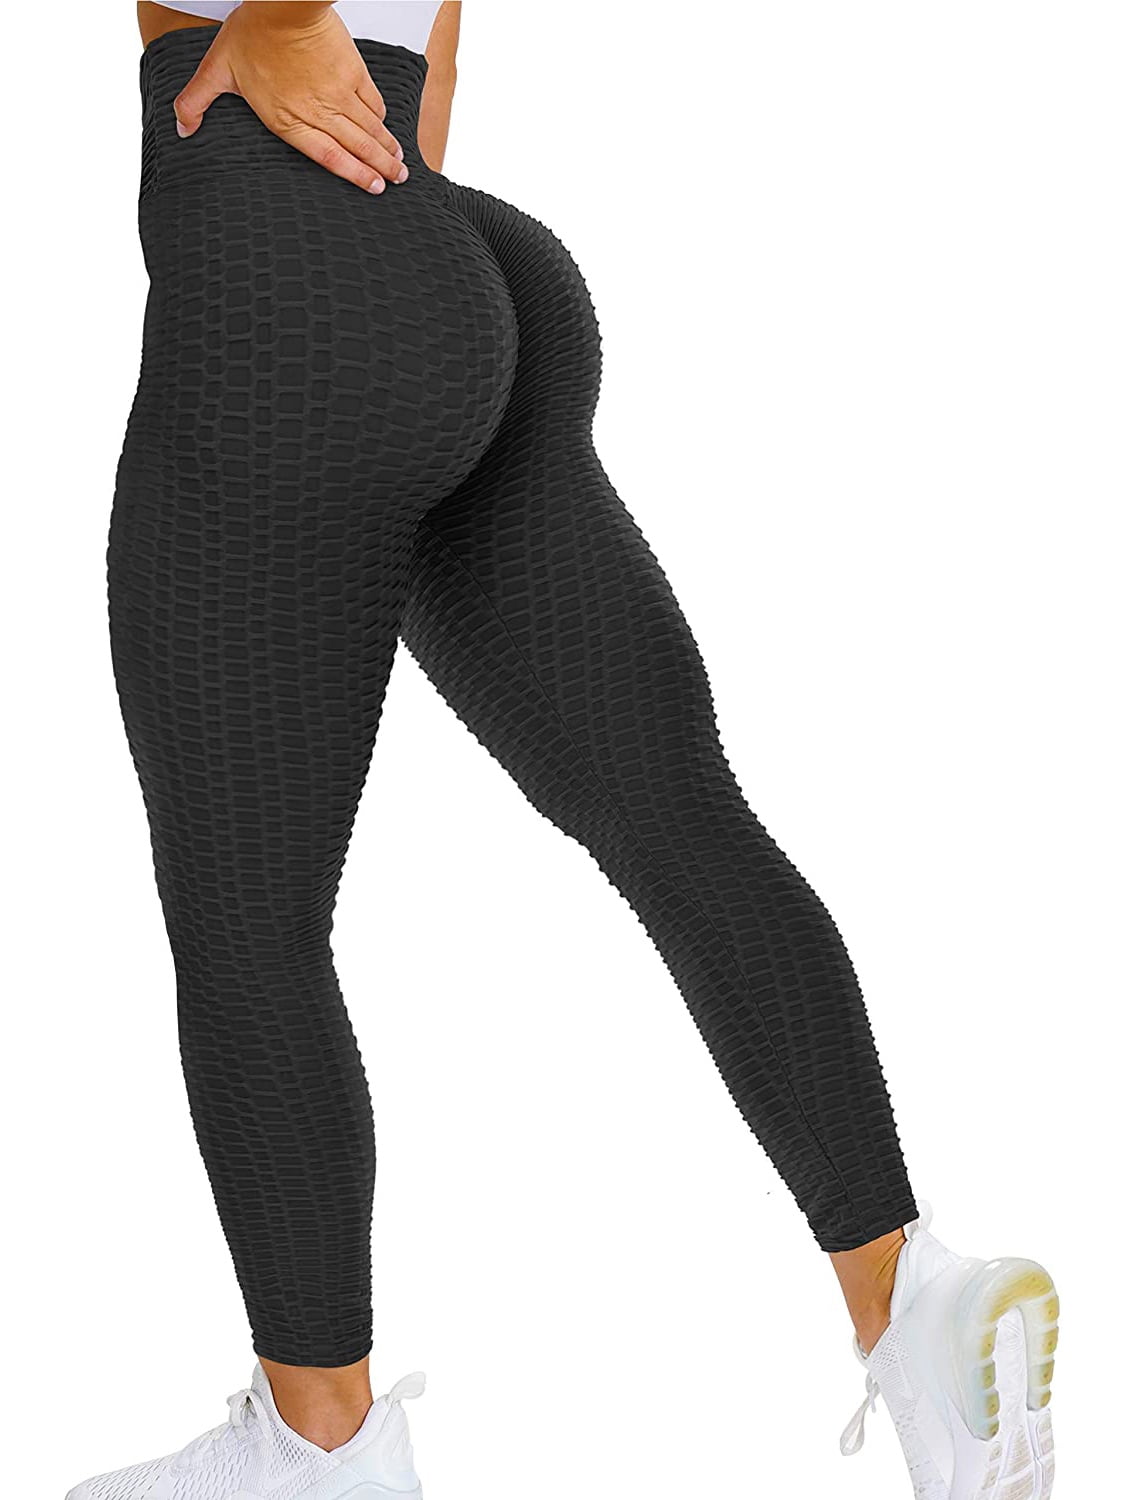 HIOINIEIY Women's Scrunch Ruched Butt Lifting Booty Enhancing Leggings High  Waist Push Up Yoga Pants with Pockets, White, XS : Buy Online at Best Price  in KSA - Souq is now 